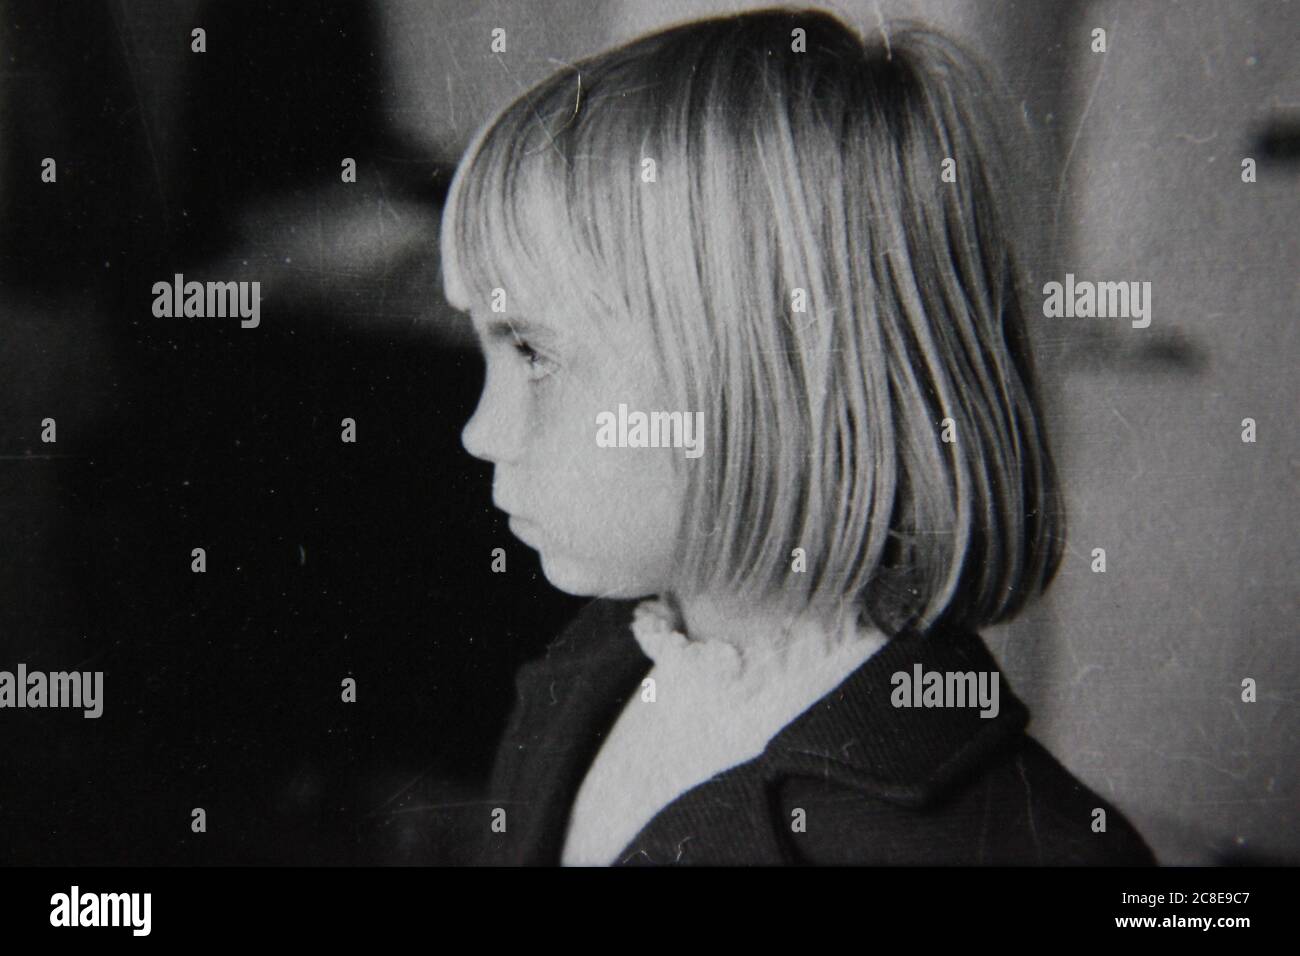 Fine 70s vintage black and white lifestyle photography of a young girl with the pageboy haircut, doggone hair. Stock Photo